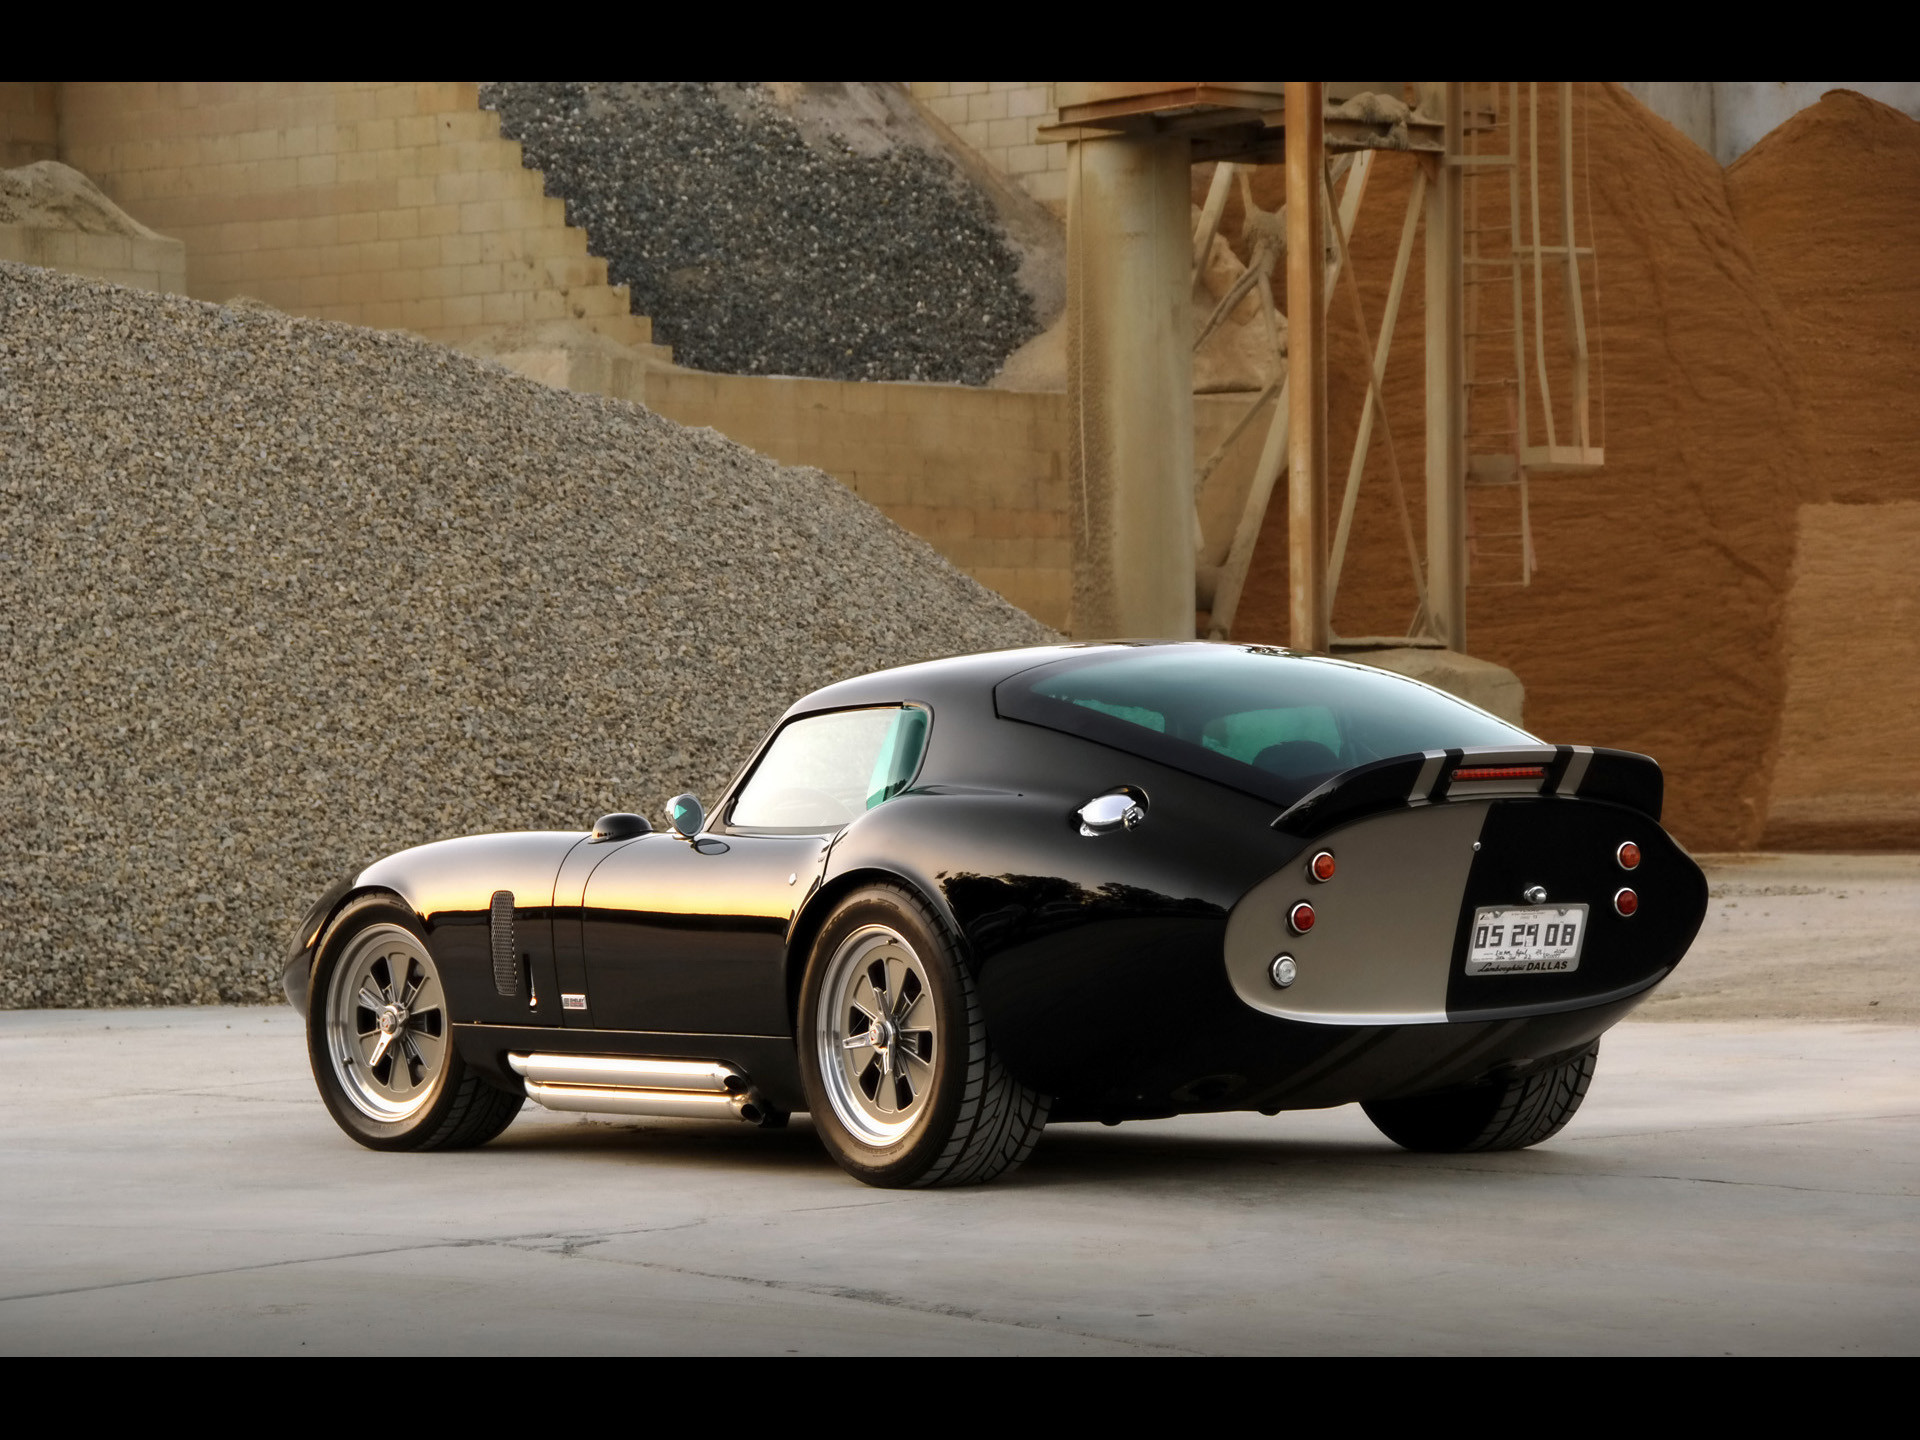 1920x1440 Wallpapers with 2009 Superformance Shelby Daytona Cobra Coupe, size: This  is the high resolution picture no.